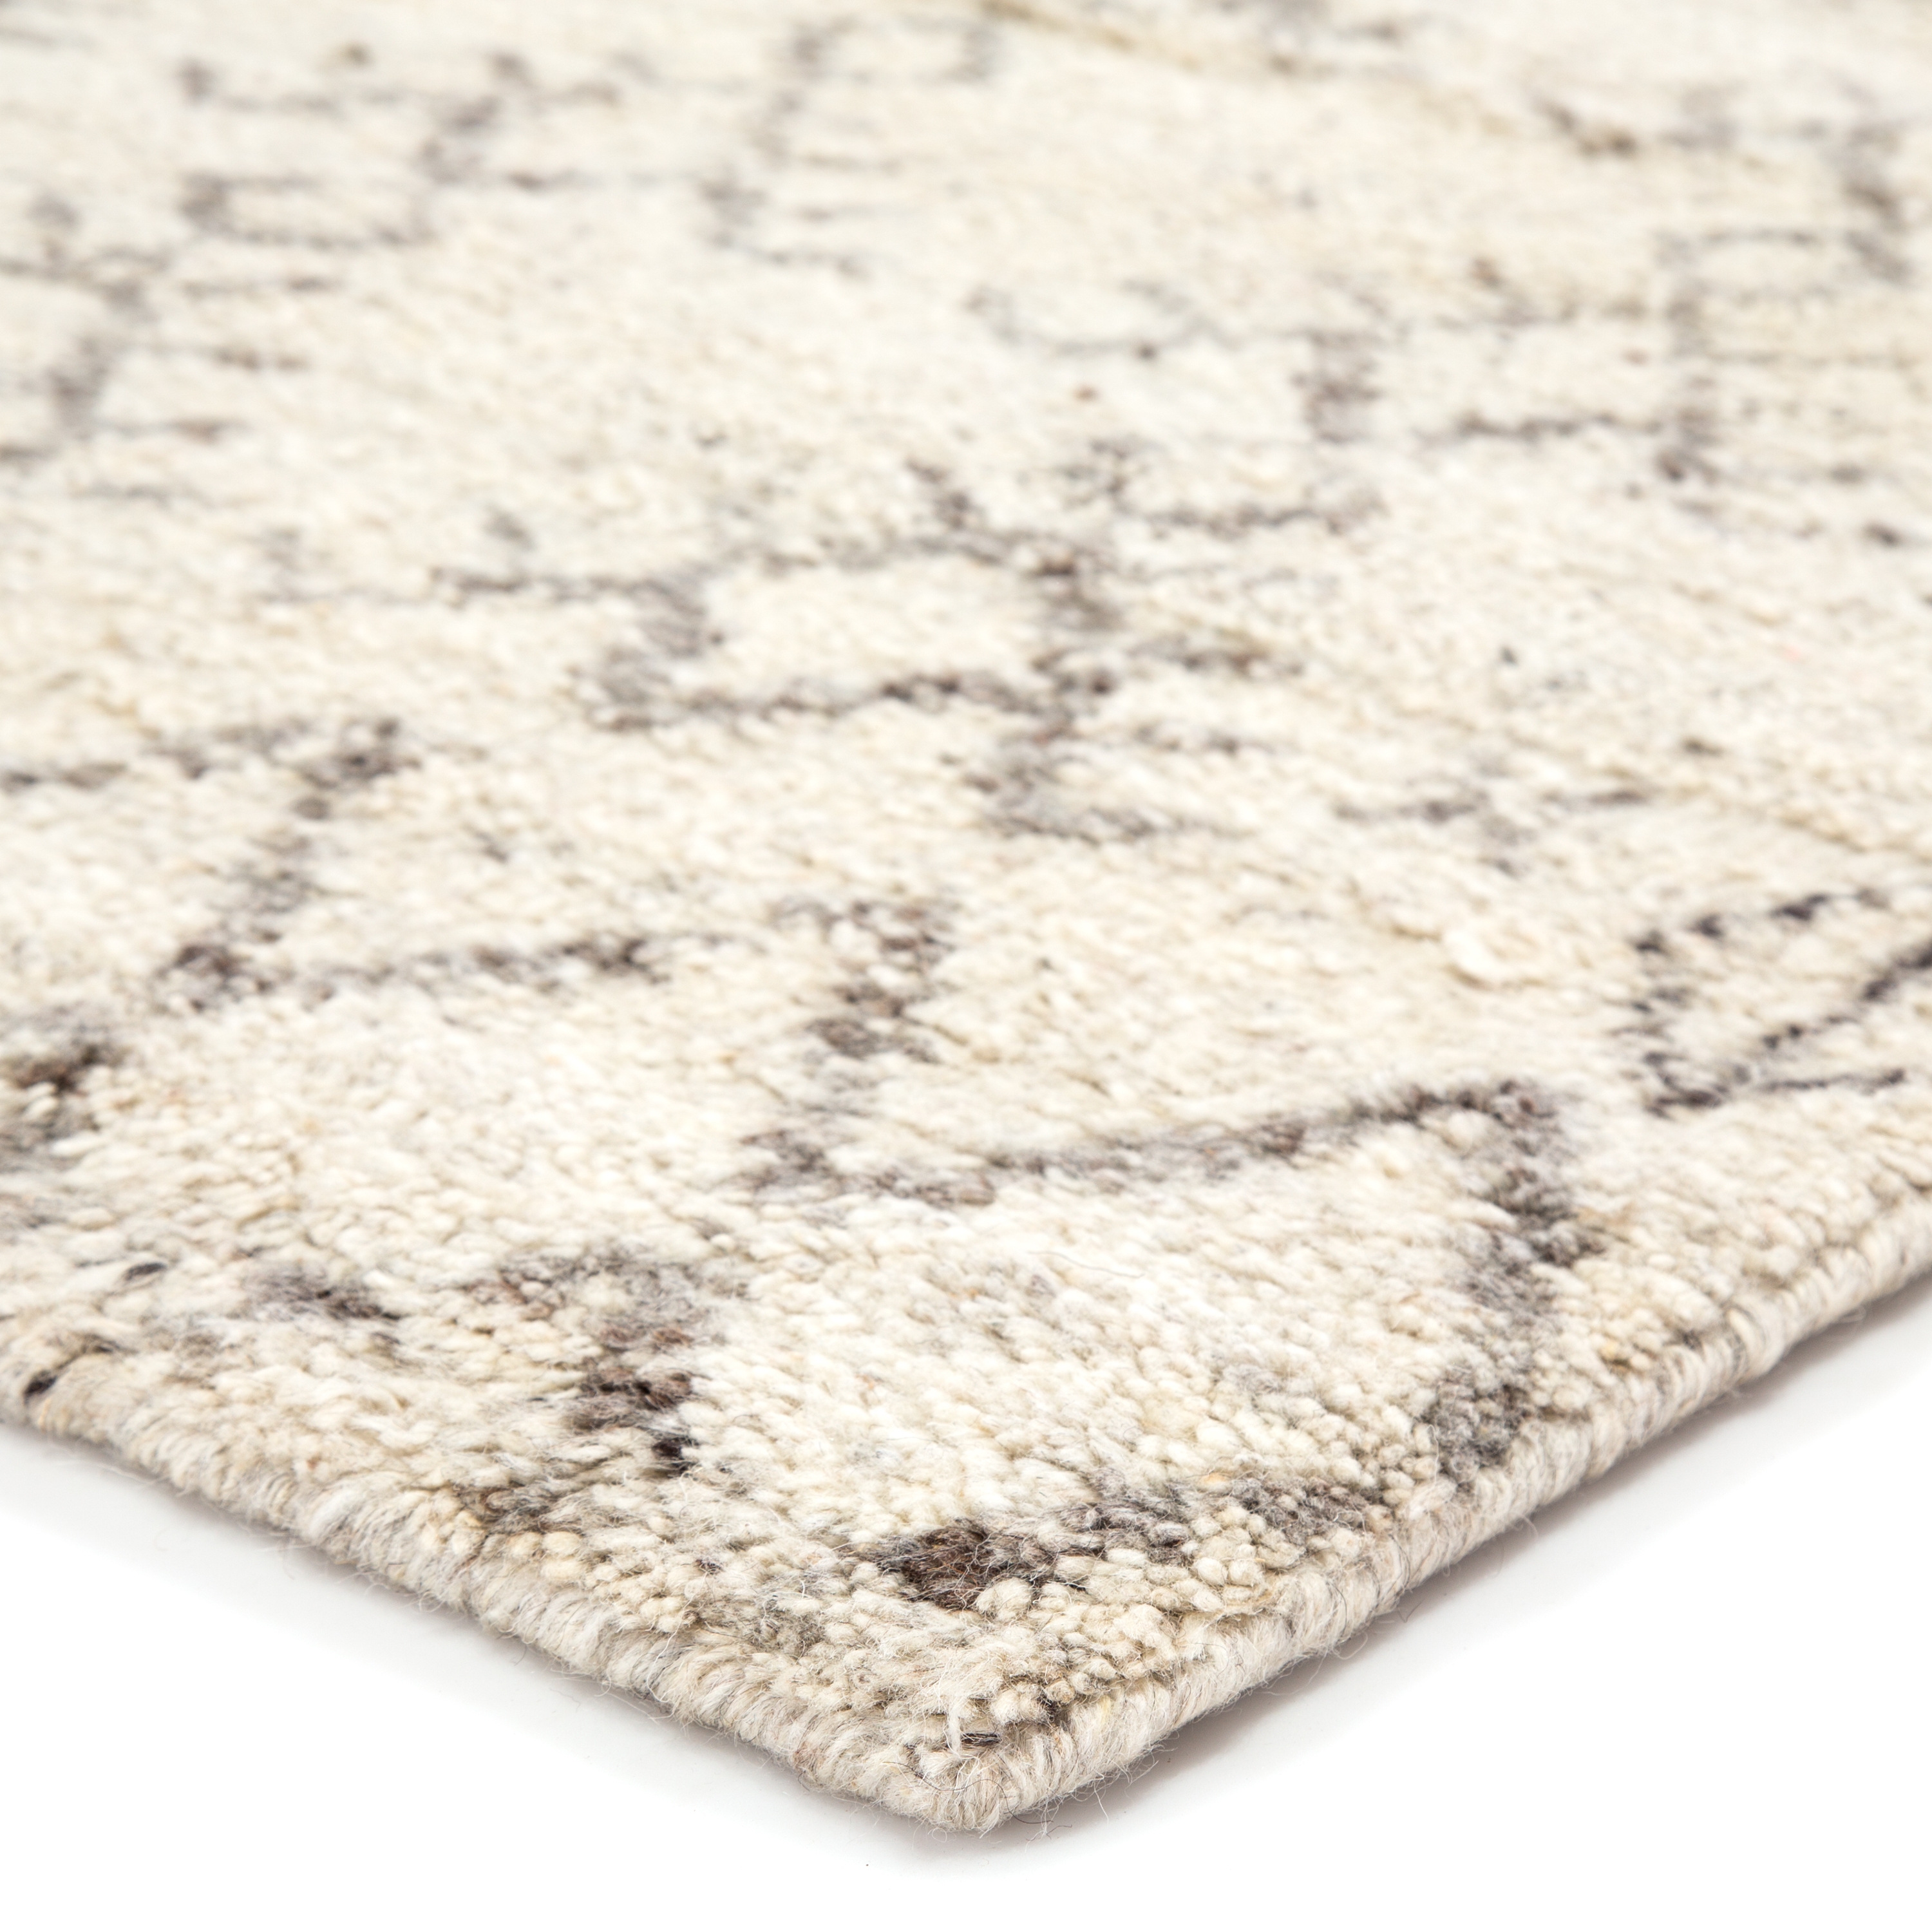 Zola Hand-Knotted Geometric Ivory/ Brown Area Rug (8' X 10') - Image 1